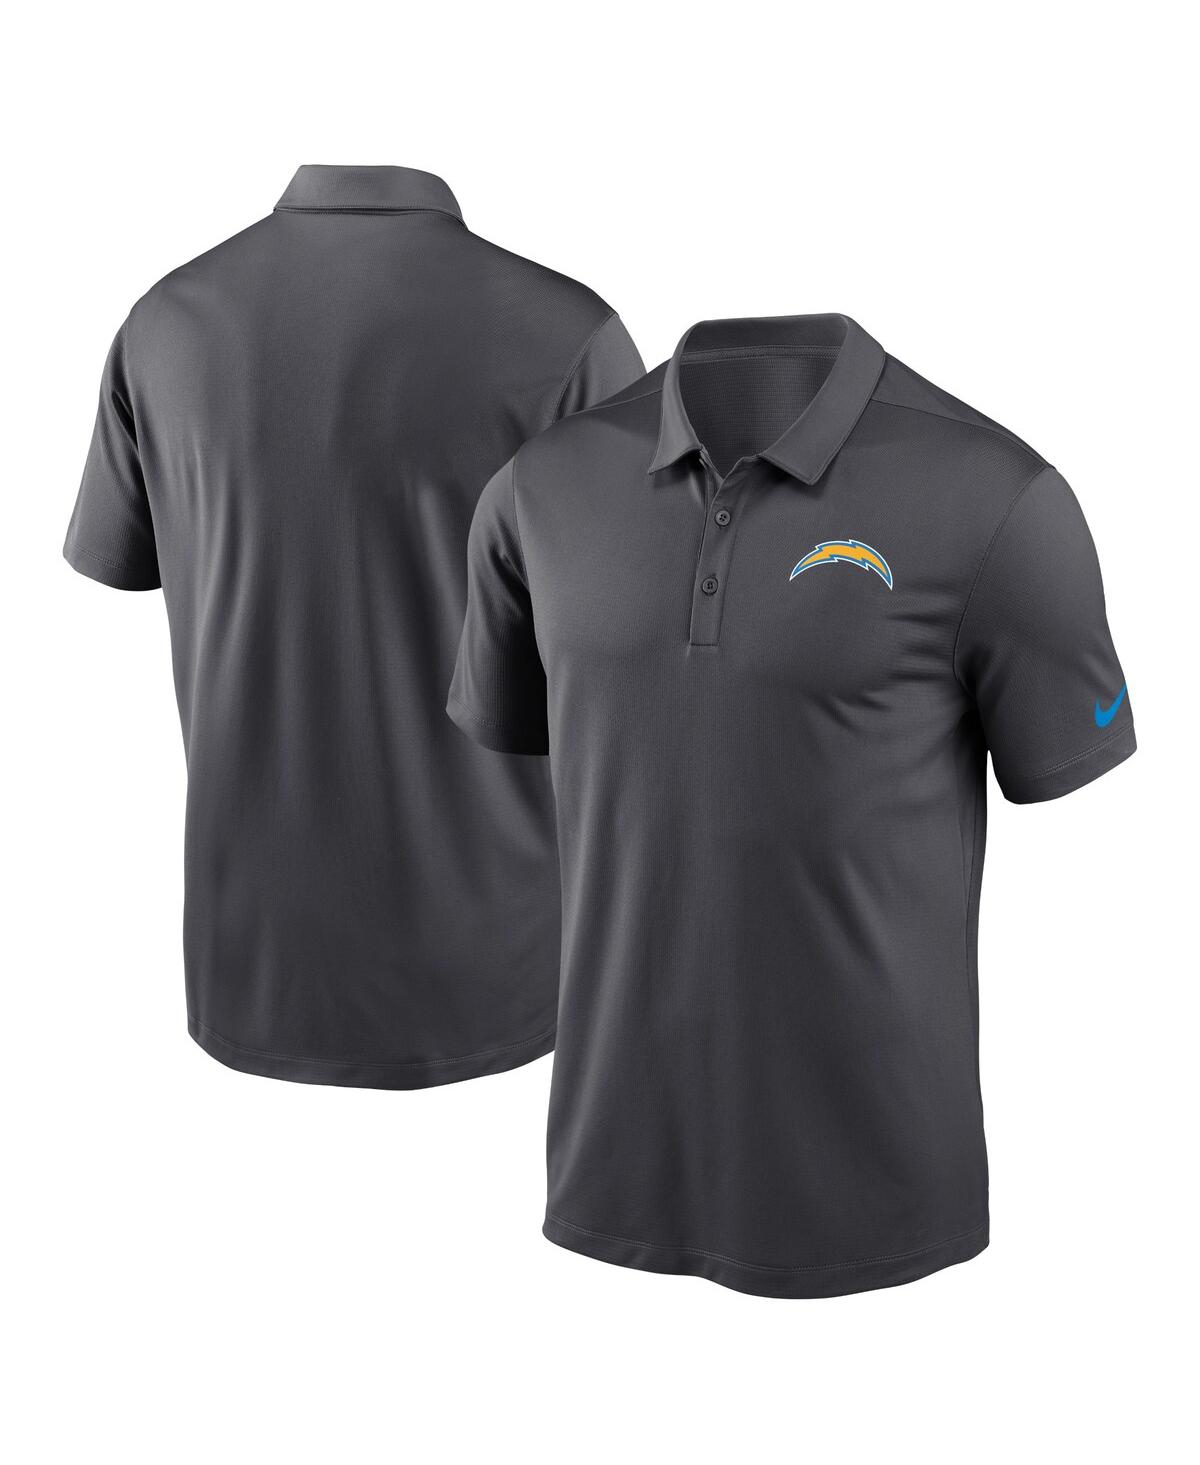 NIKE MEN'S NIKE ANTHRACITE LOS ANGELES CHARGERS FRANCHISE TEAM LOGO PERFORMANCE POLO SHIRT